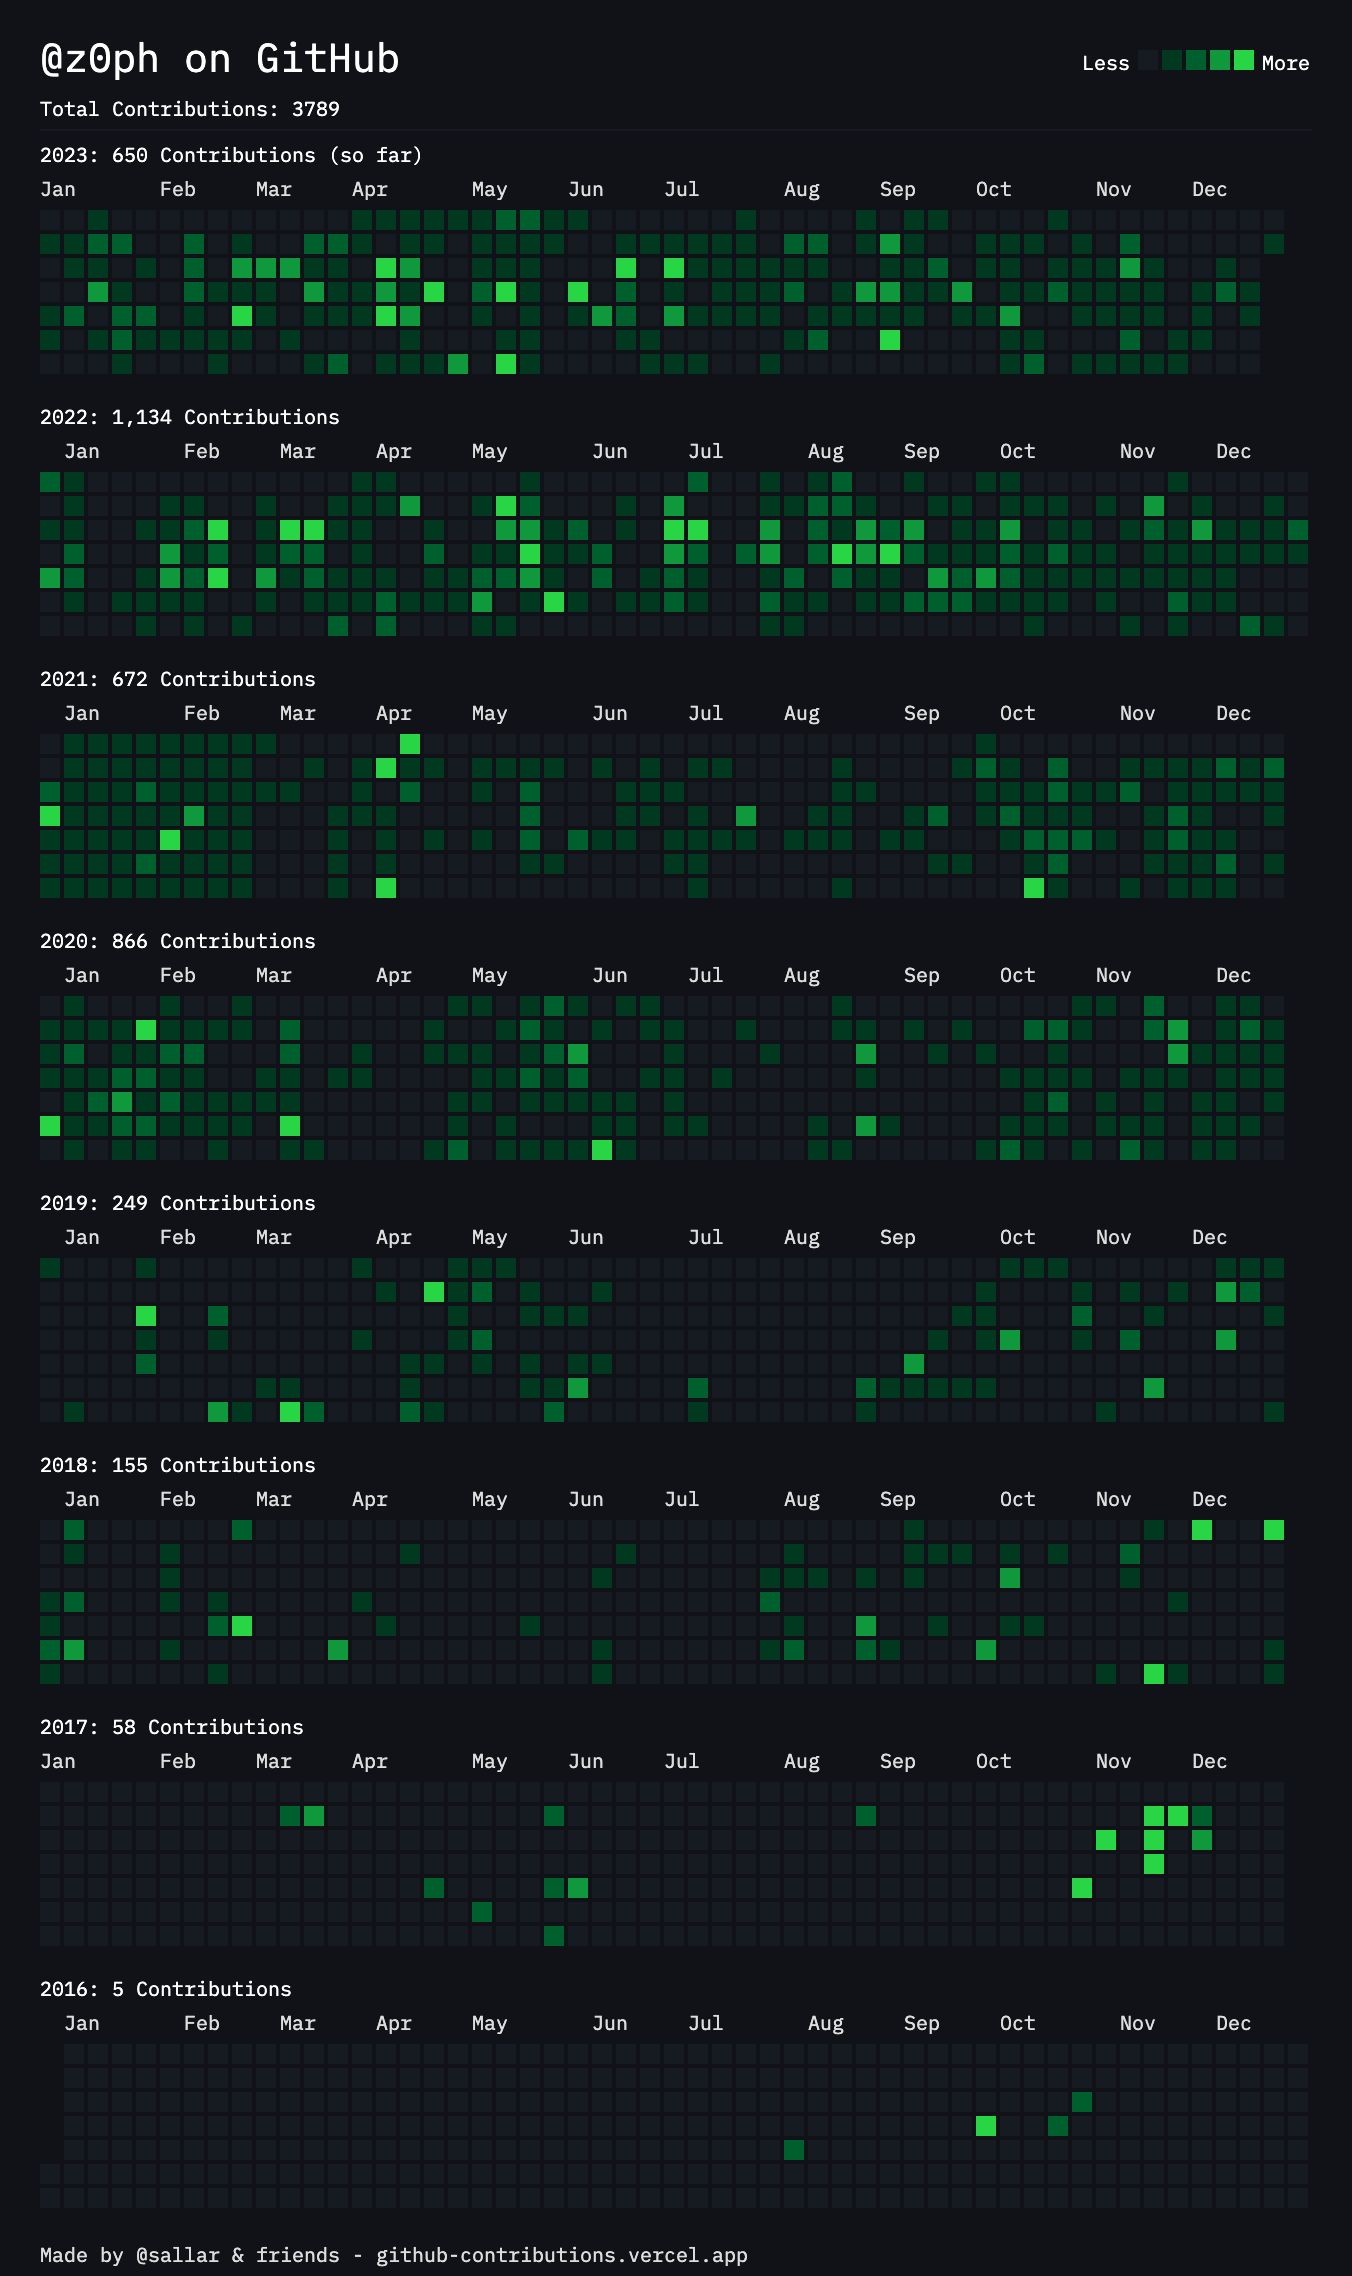 Github Contributions over the years